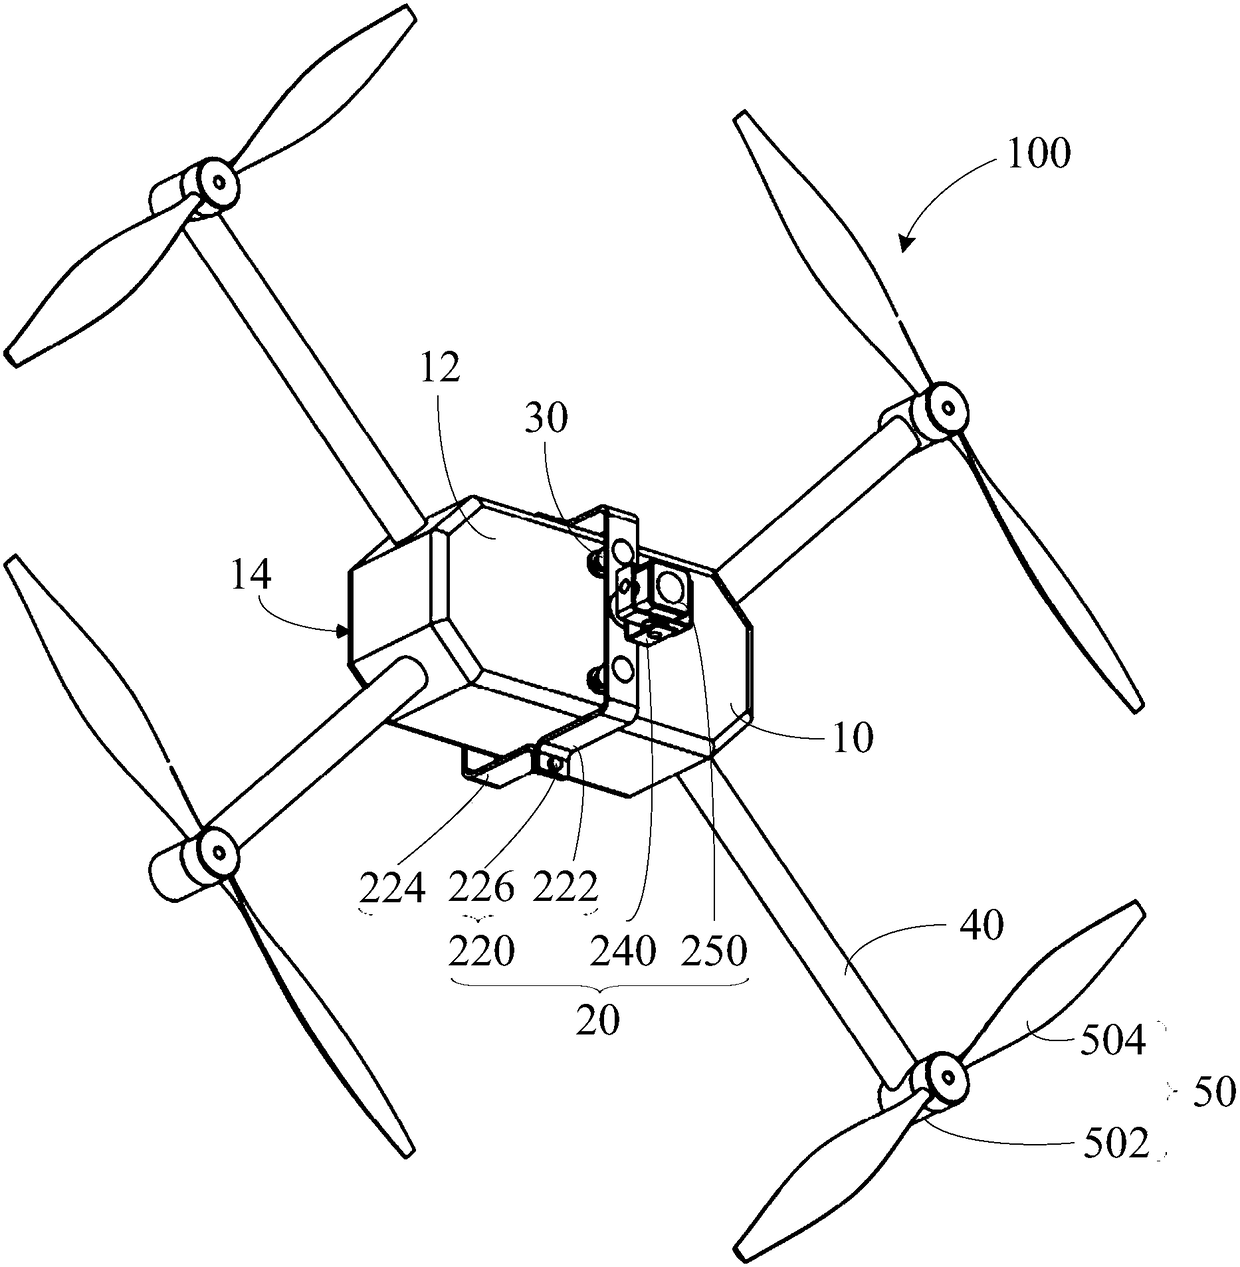 Photographing assembly and unmanned aerial vehicle with same